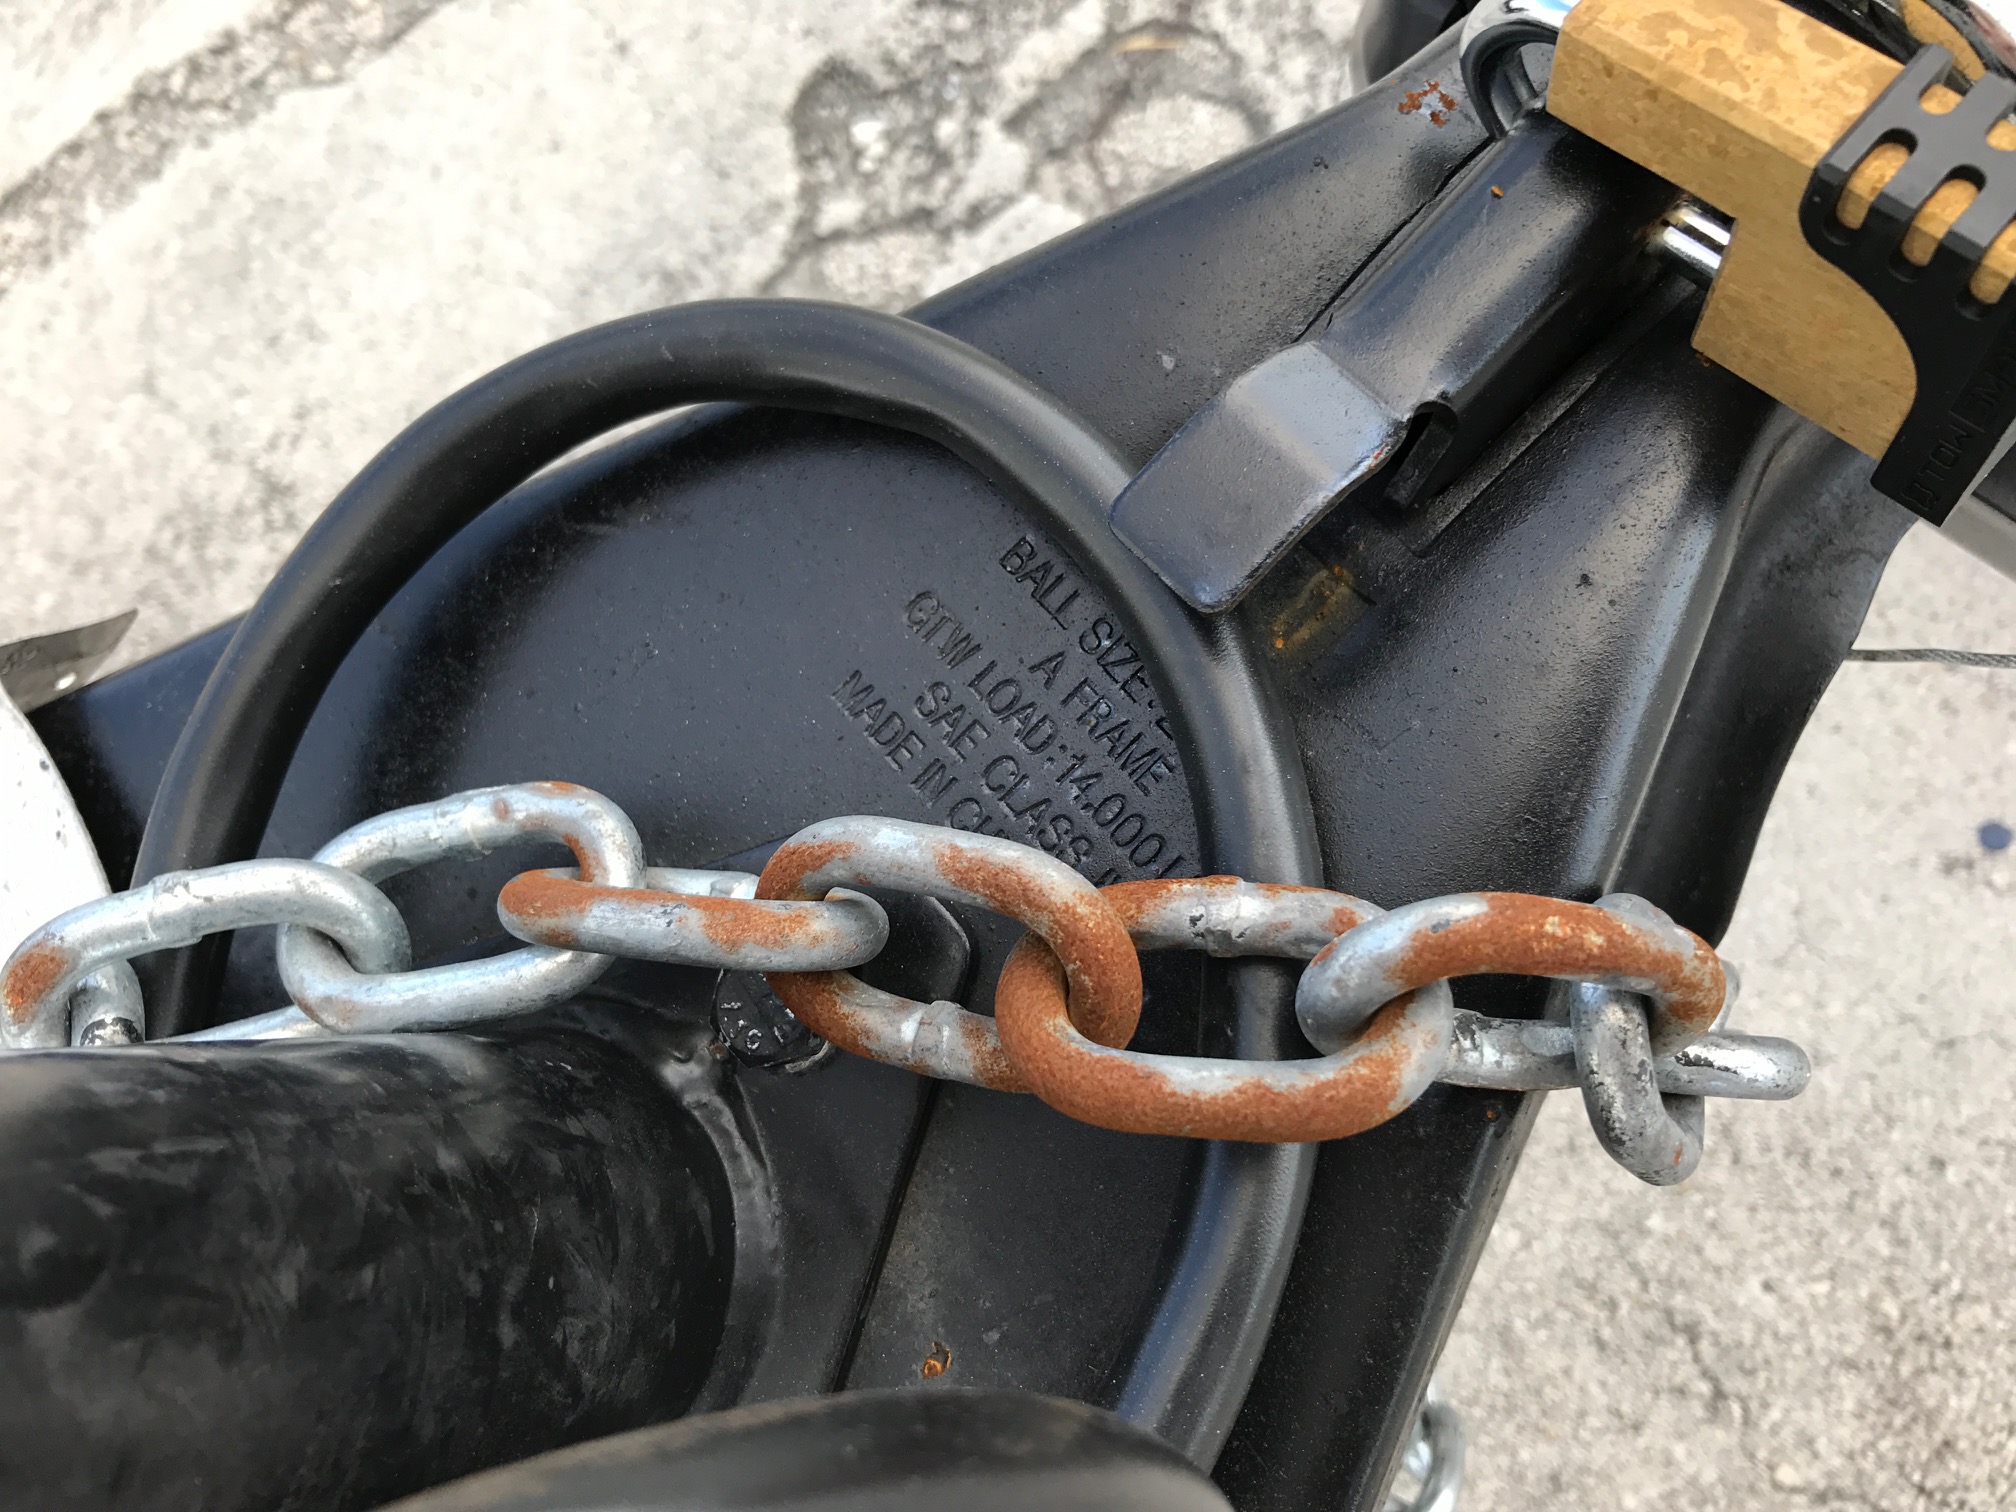 Rusted chains at delivery